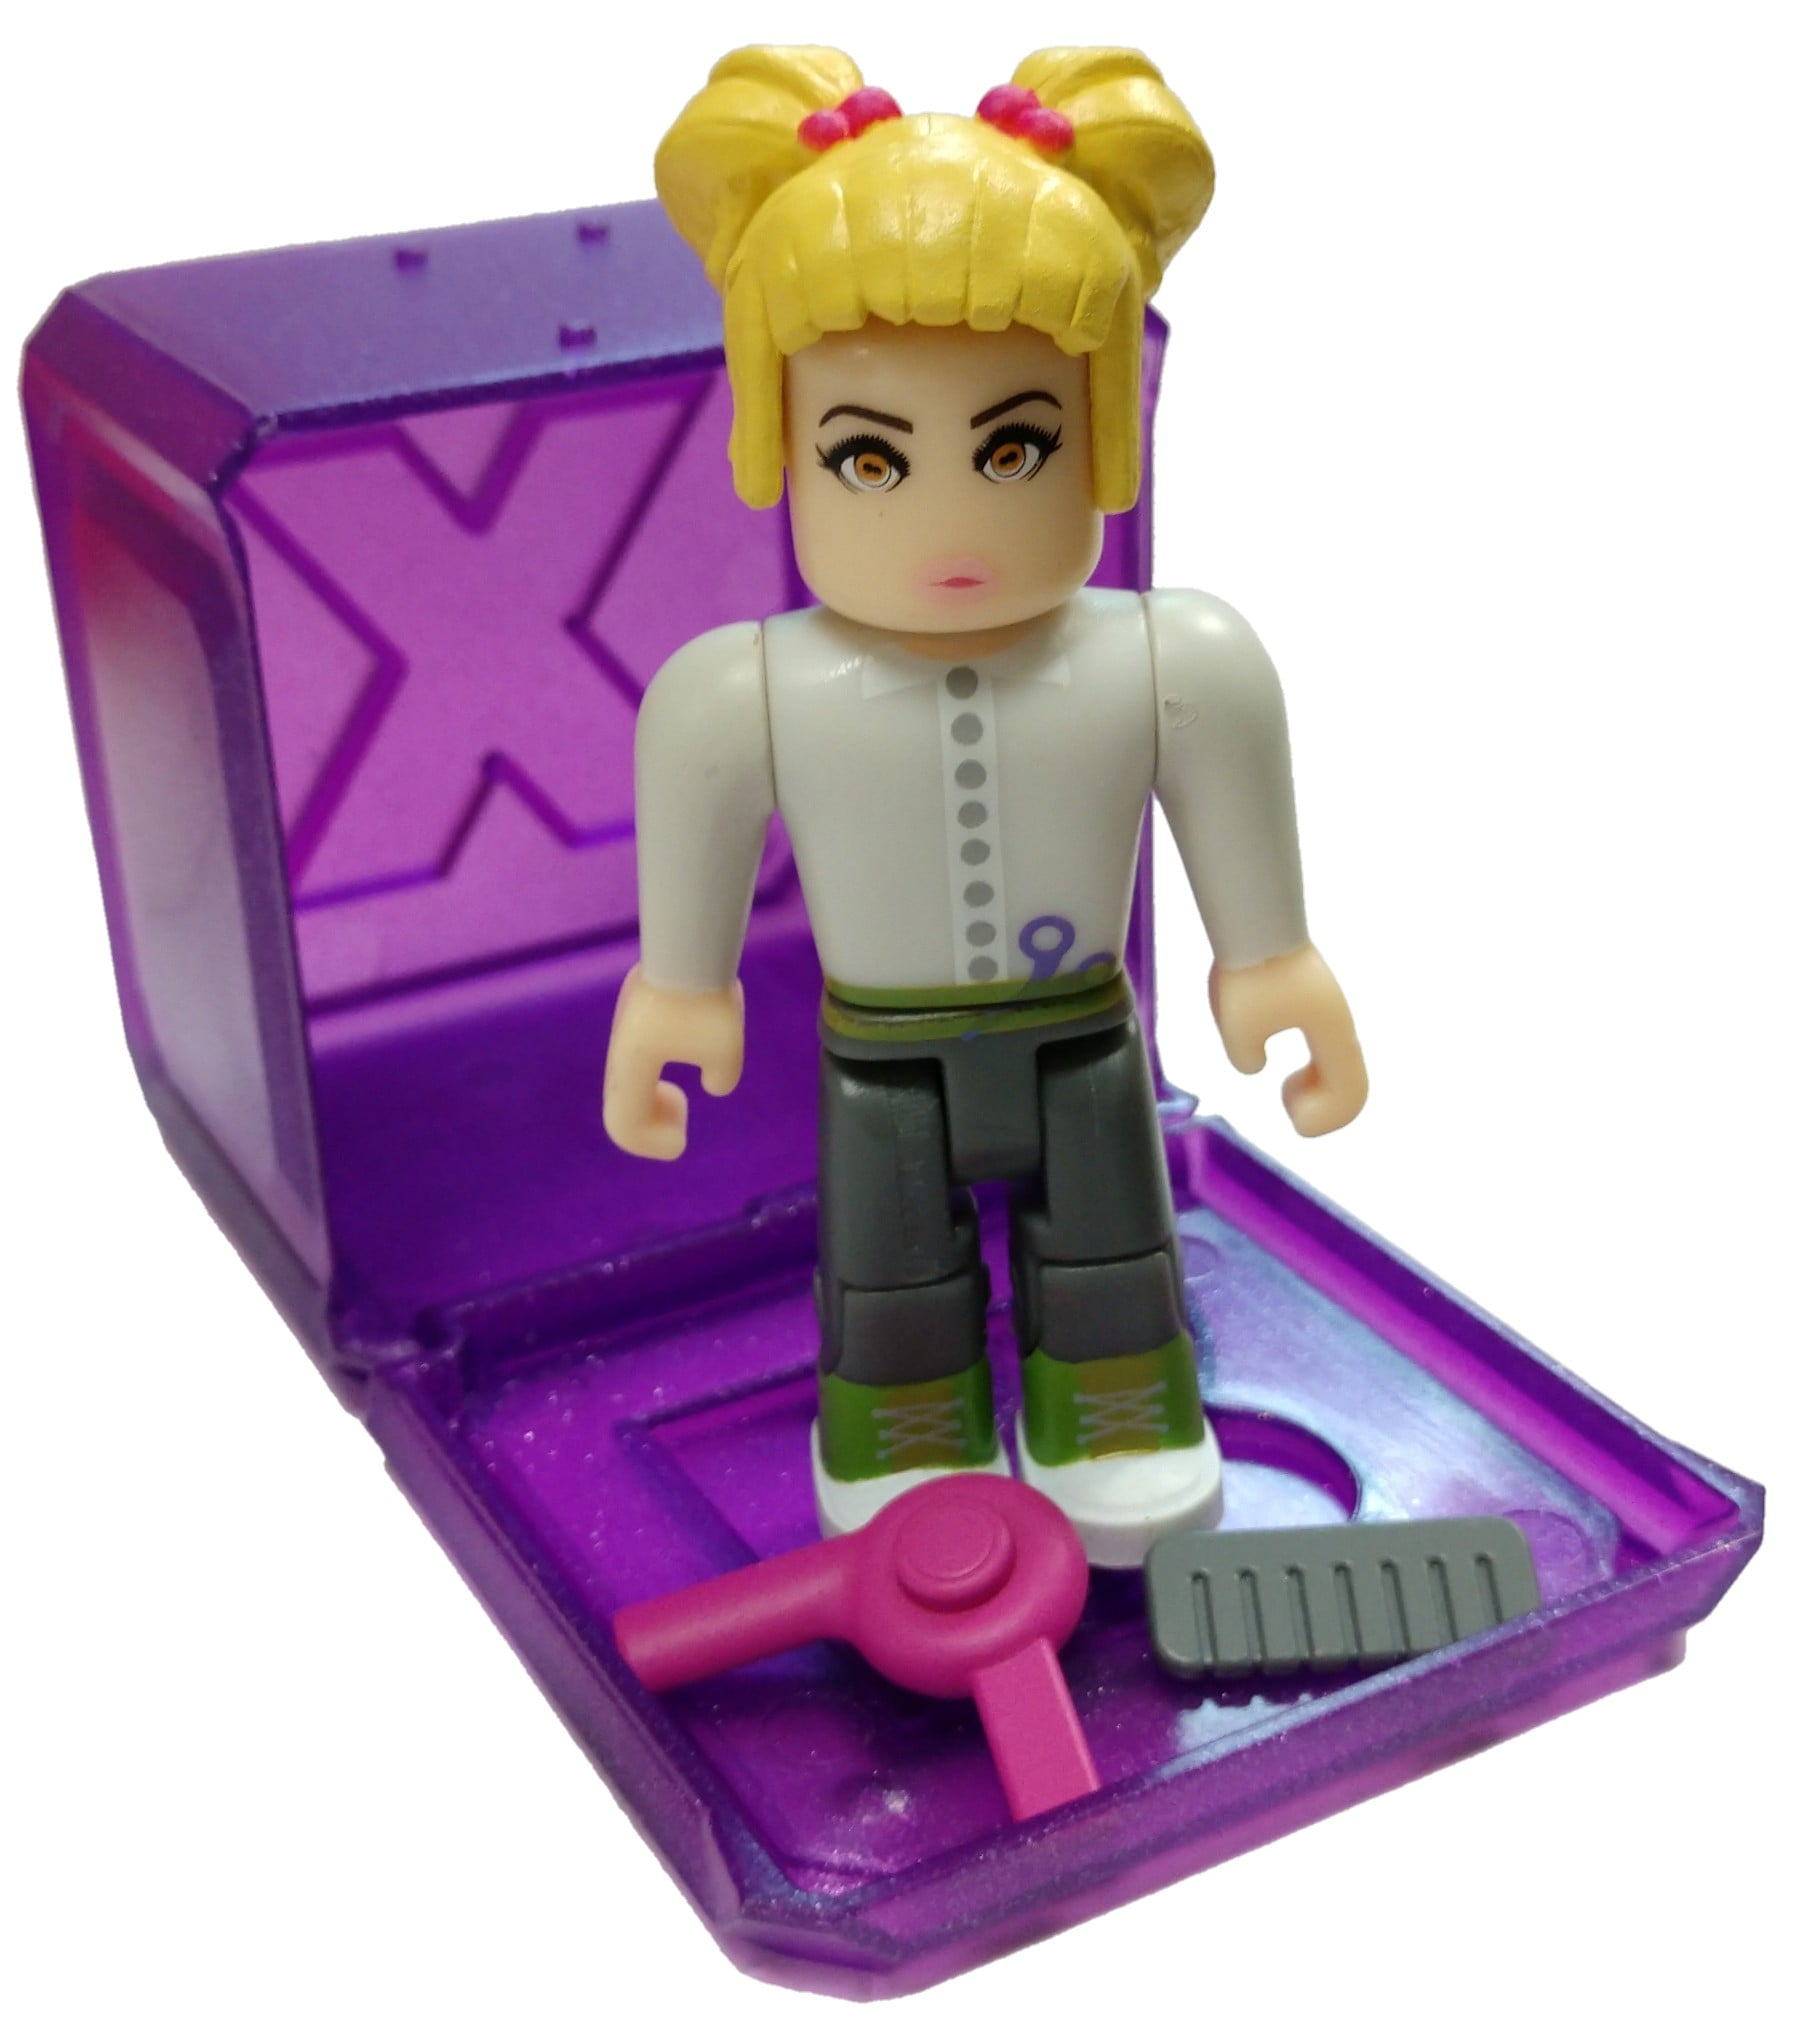 Roblox Celebrity Collection Series 3 Stylz Salon Vip Stylist Mini Figure With Cube And Online Code No Packaging Walmart Com Walmart Com - roblox slush salon how to work as a hairstylist